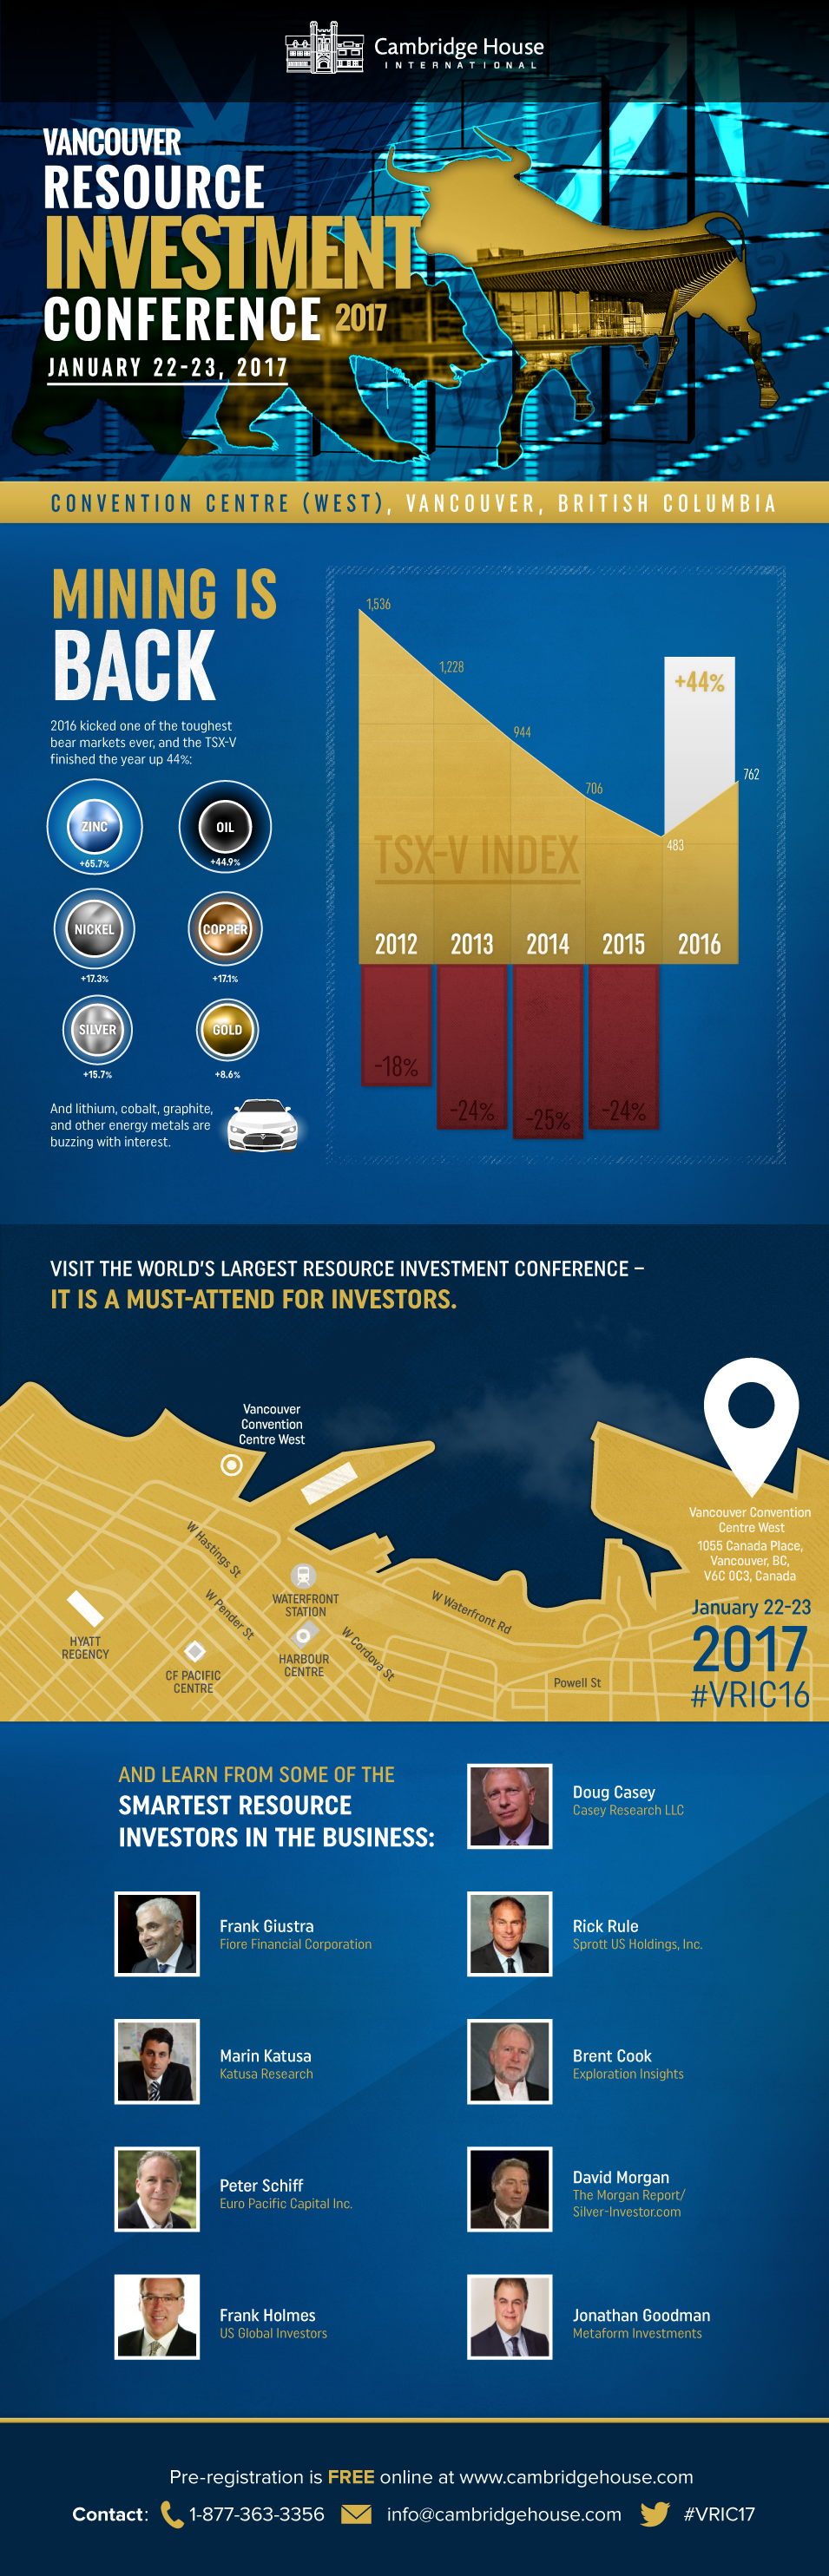 The Vancouver Resource Investment Conference 2017